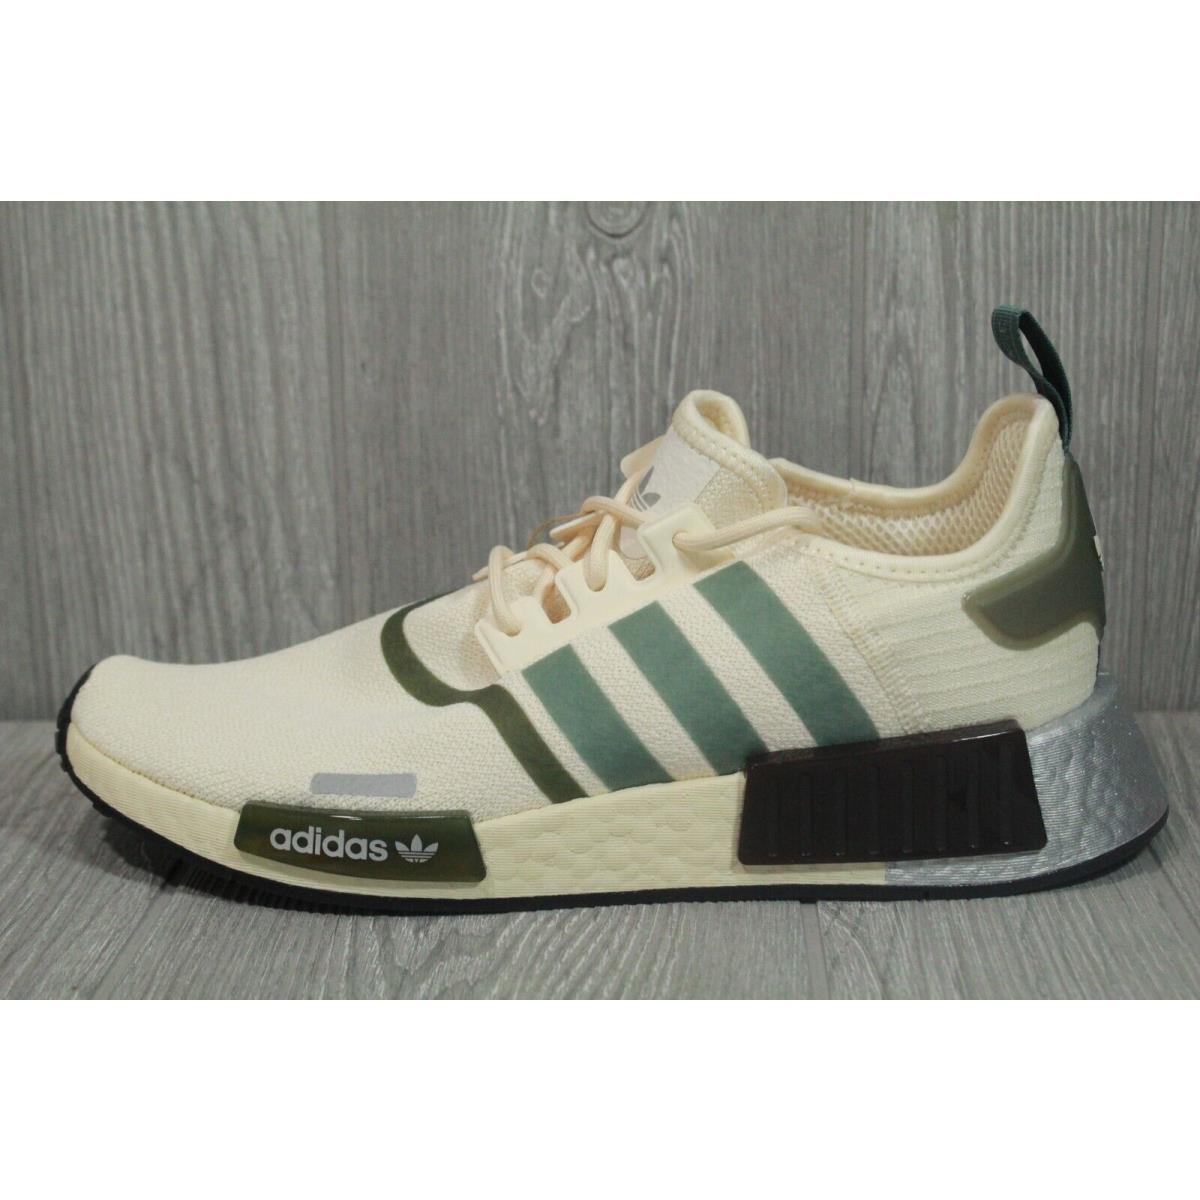 Adidas Women`s NMD_R1 Wonder White Olive Green Shoes GX6490 Size  |  692740710778 - Adidas shoes NMD - Multicolor | SporTipTop